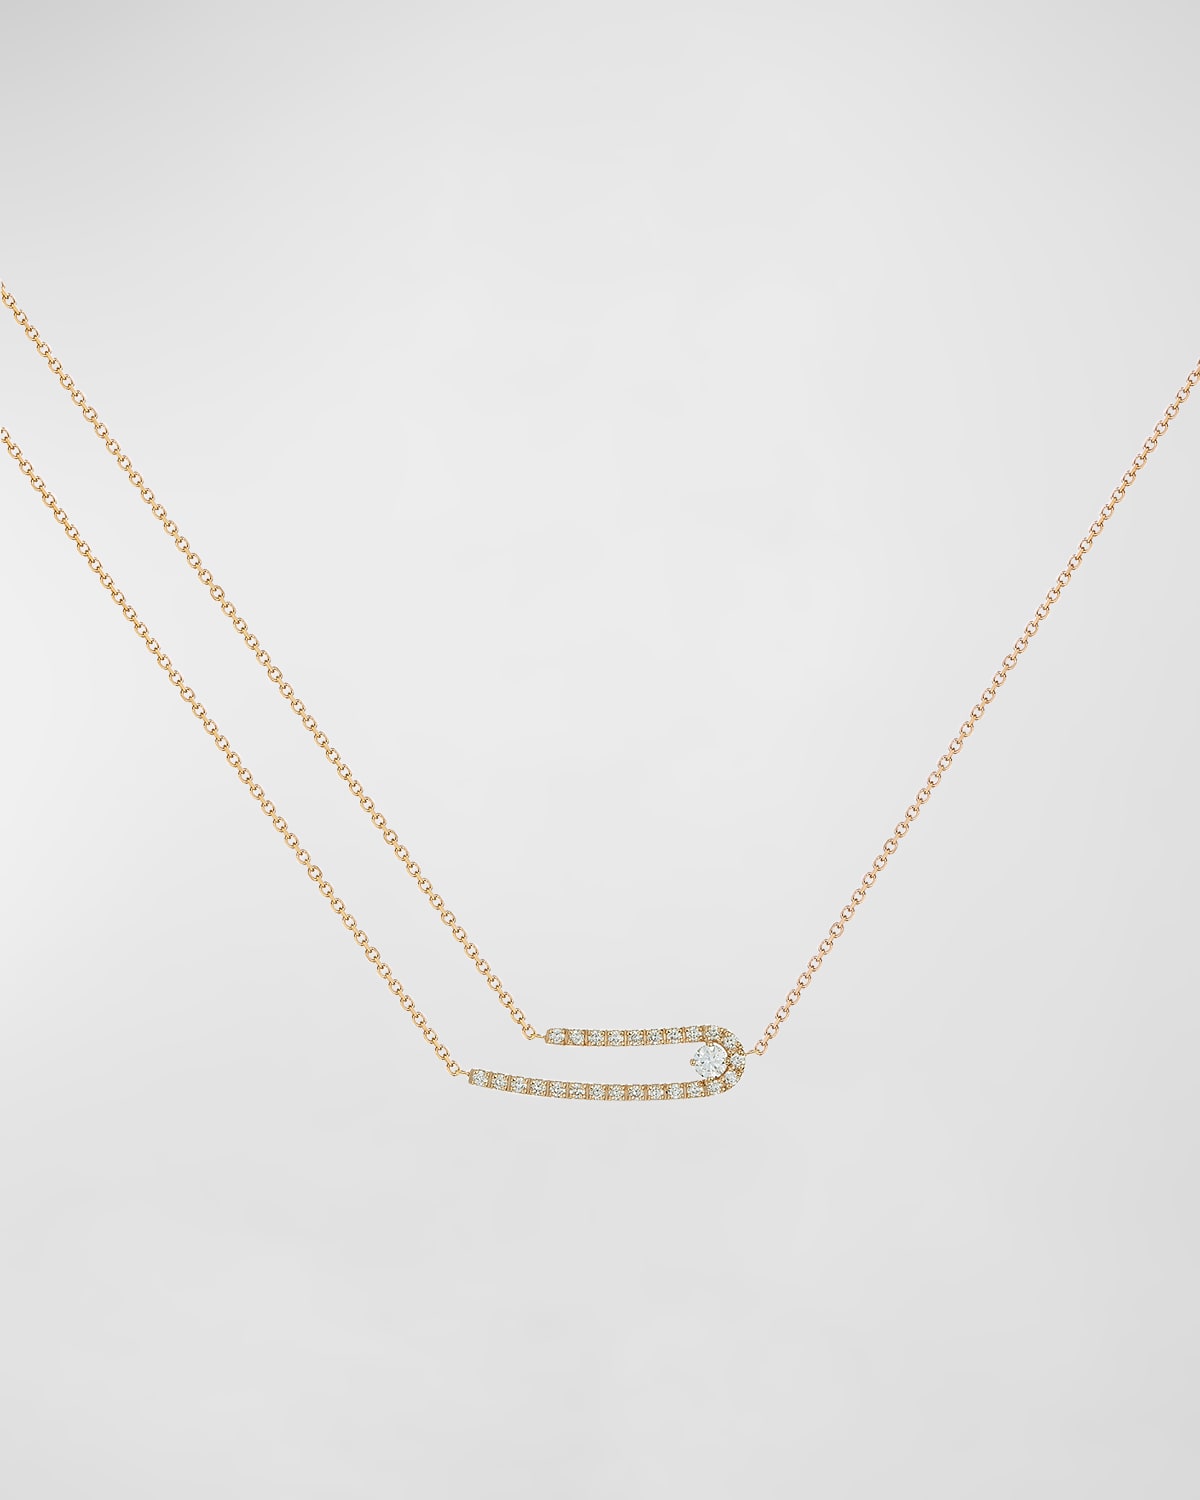 18K Rose Gold Multi Chain Necklace with Diamonds